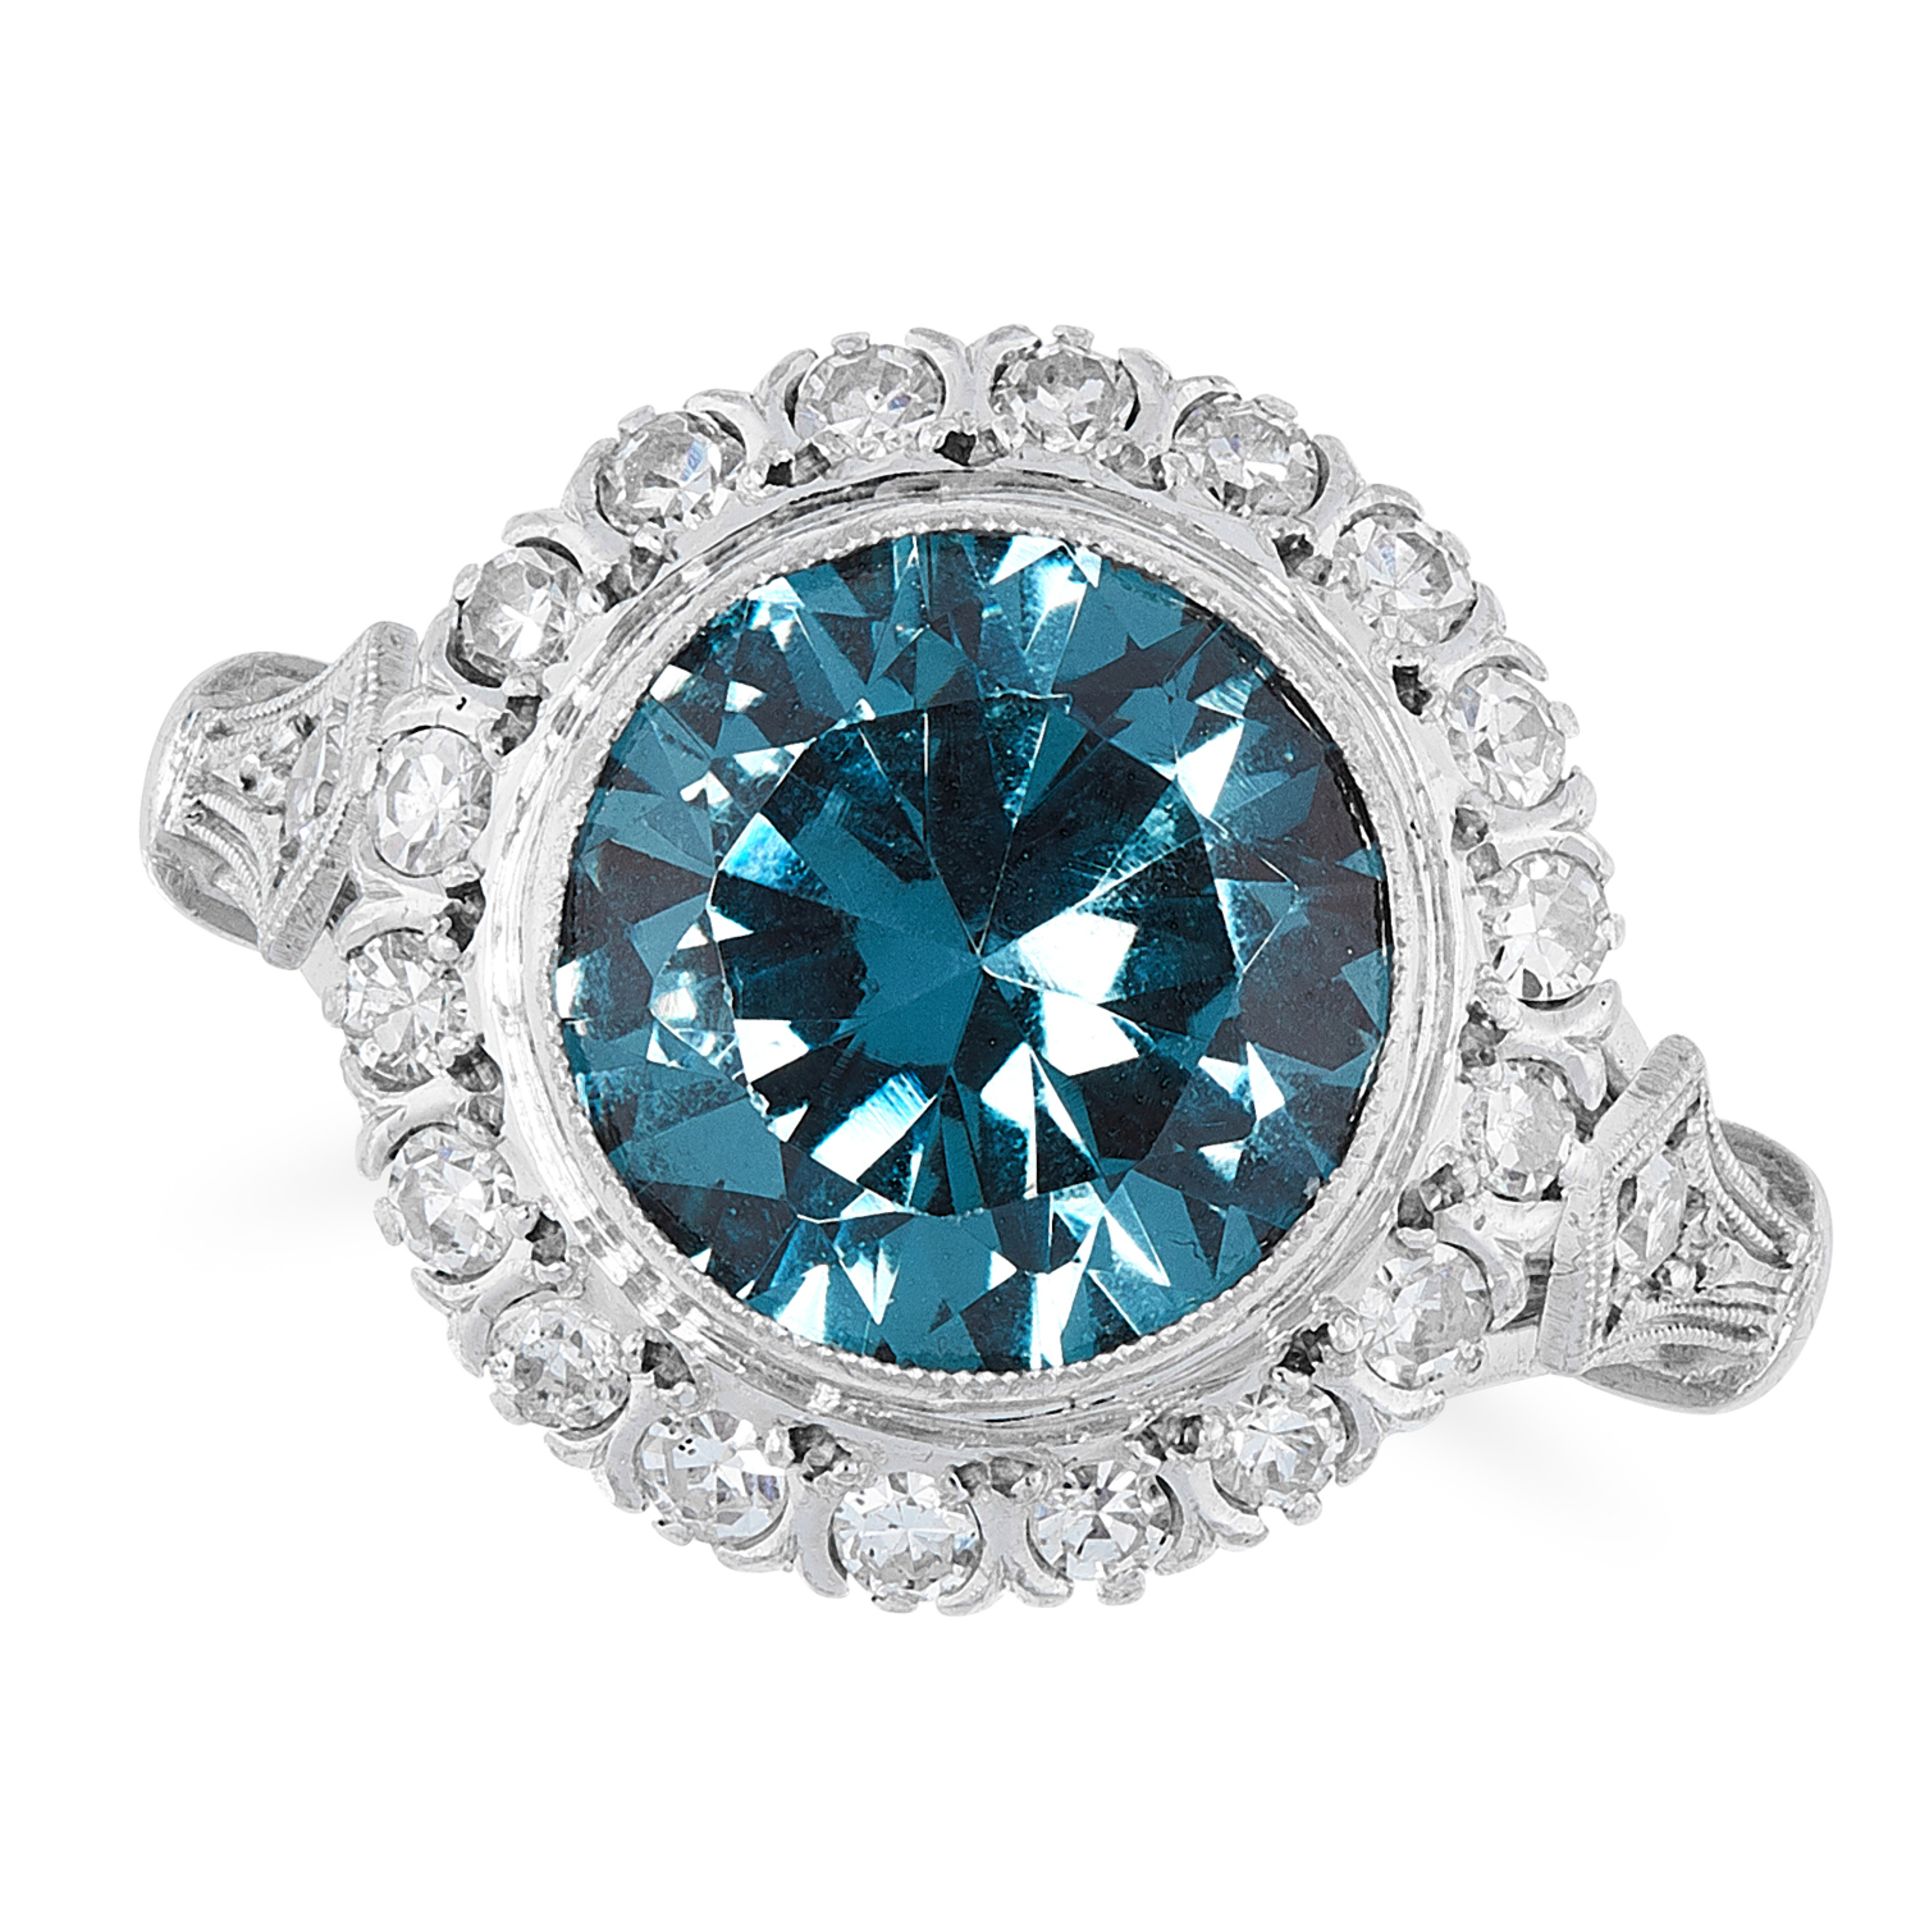 AN ANTIQUE ZIRCON AND DIAMOND RING, CIRCA 1930 in platinum, set with a central round cut blue zircon